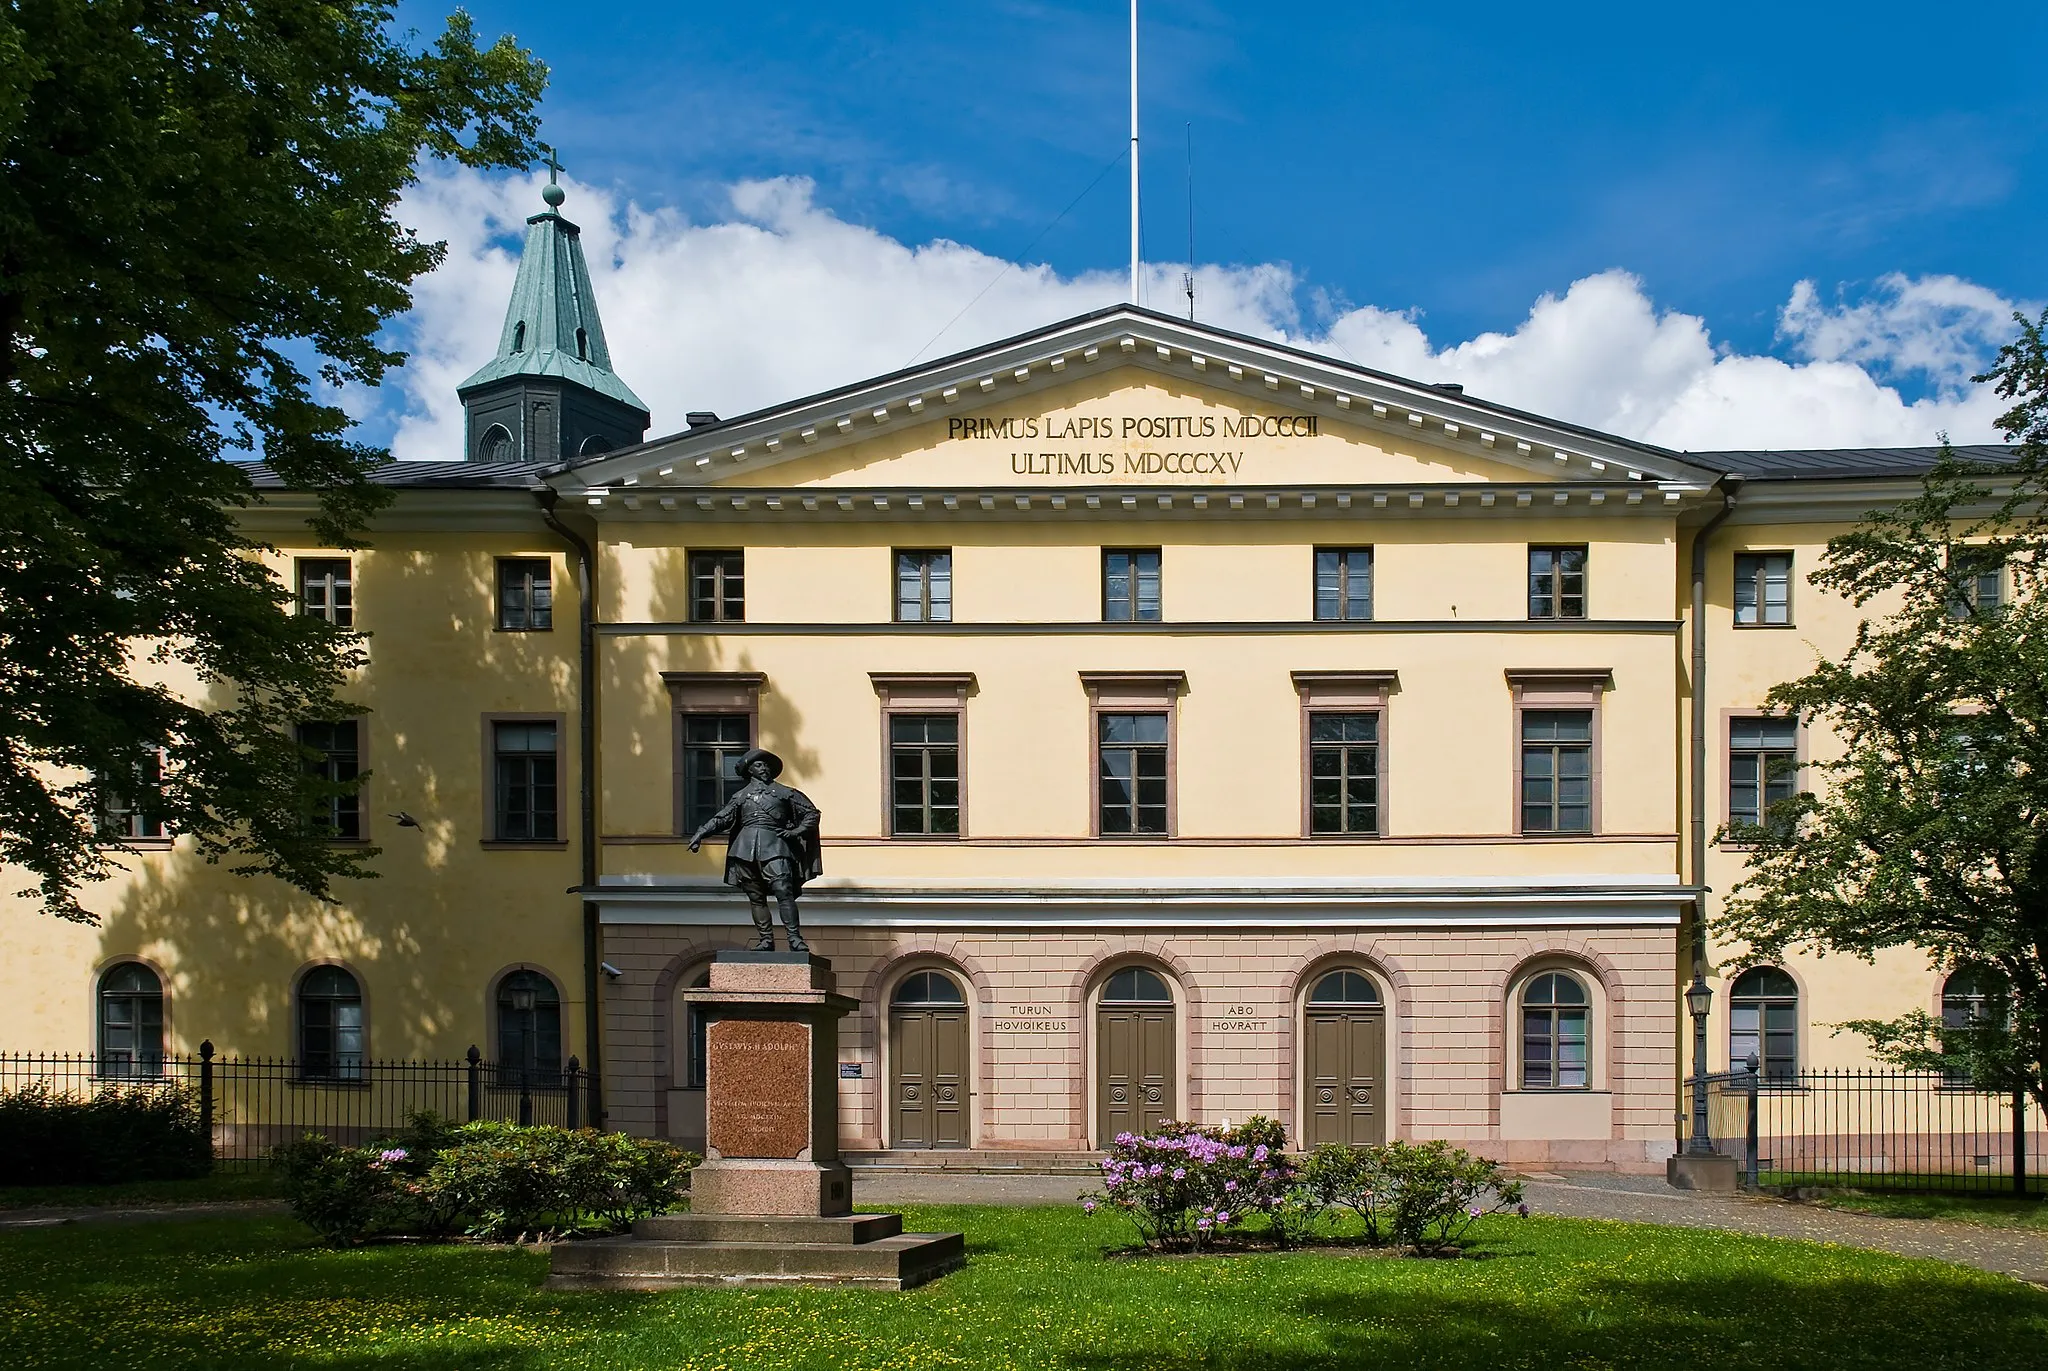 Photo showing: Court of Appeal, Academy House, Turku, with Turku Cathedral's tower on the background, and a statue of Gustav II Adolf, the founder of the Court of Appeal, on the foreground.